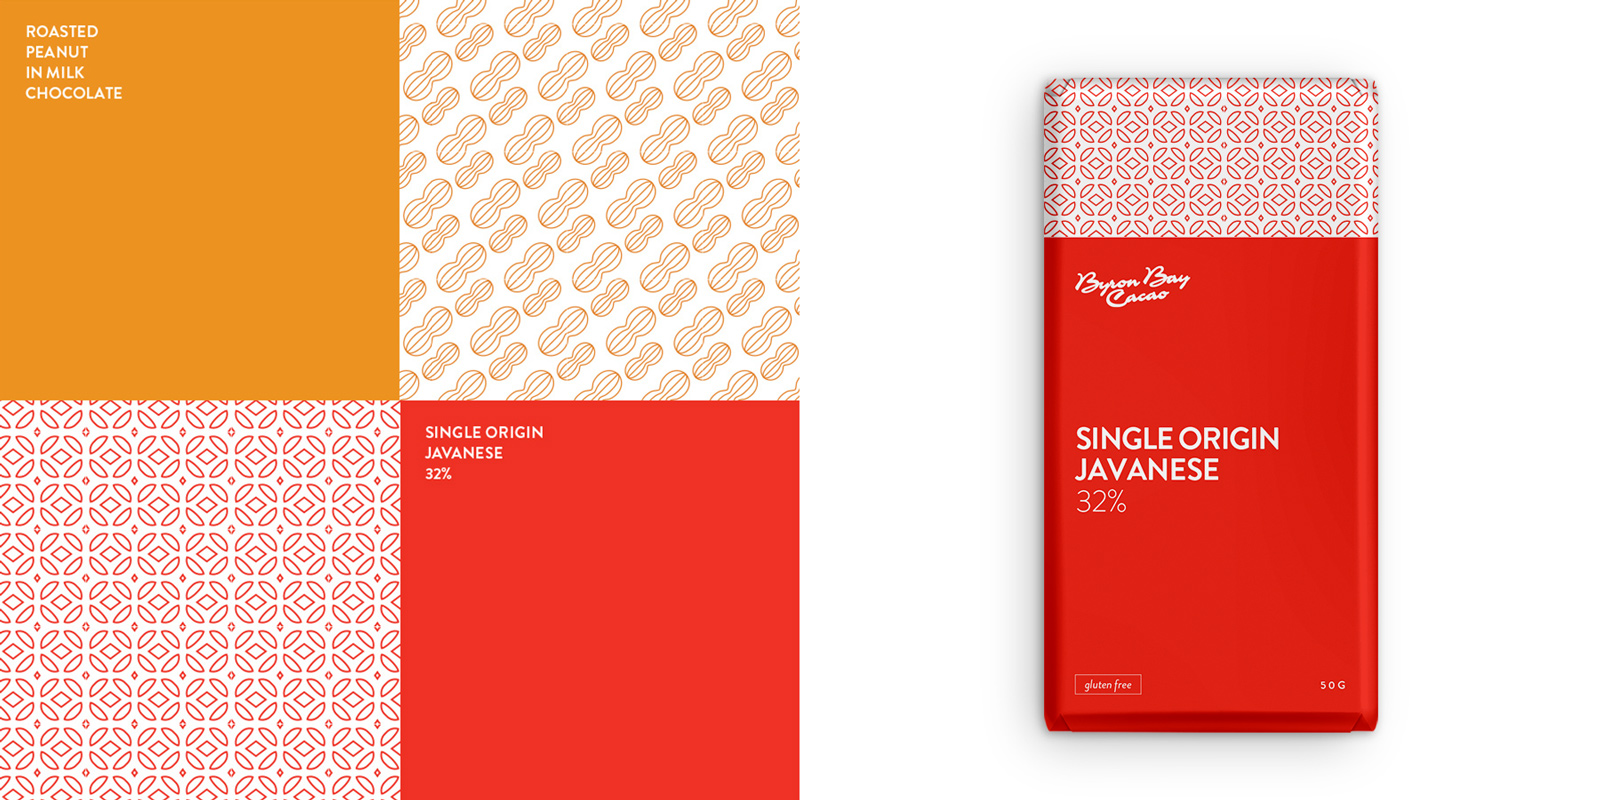 Byron Bay Cacao product packaging design by Kaliber Studio